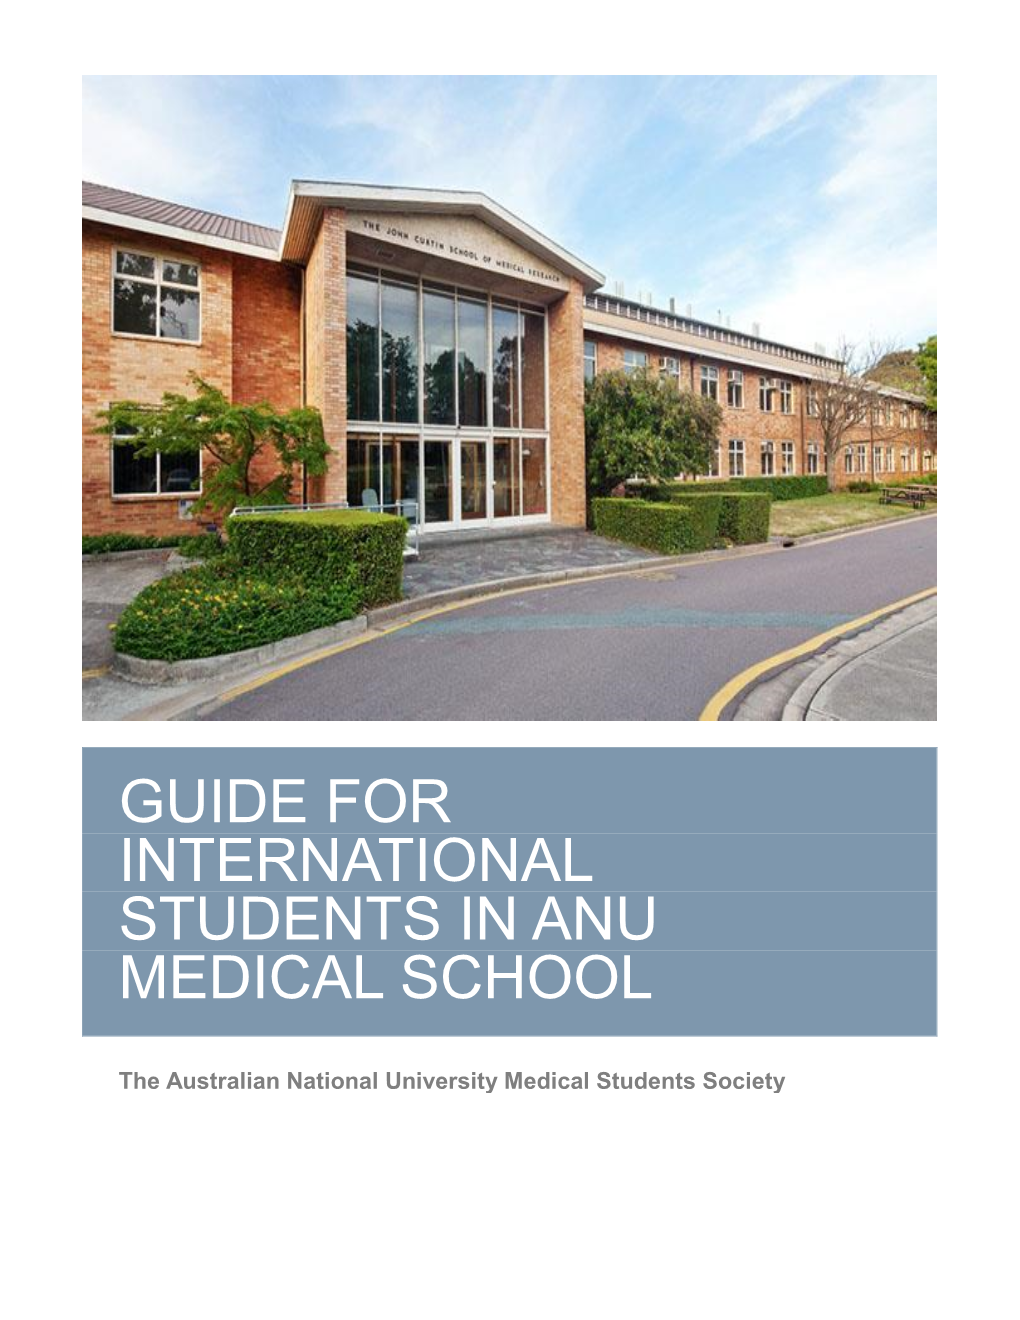 Guide for International Students in Anu Medical School